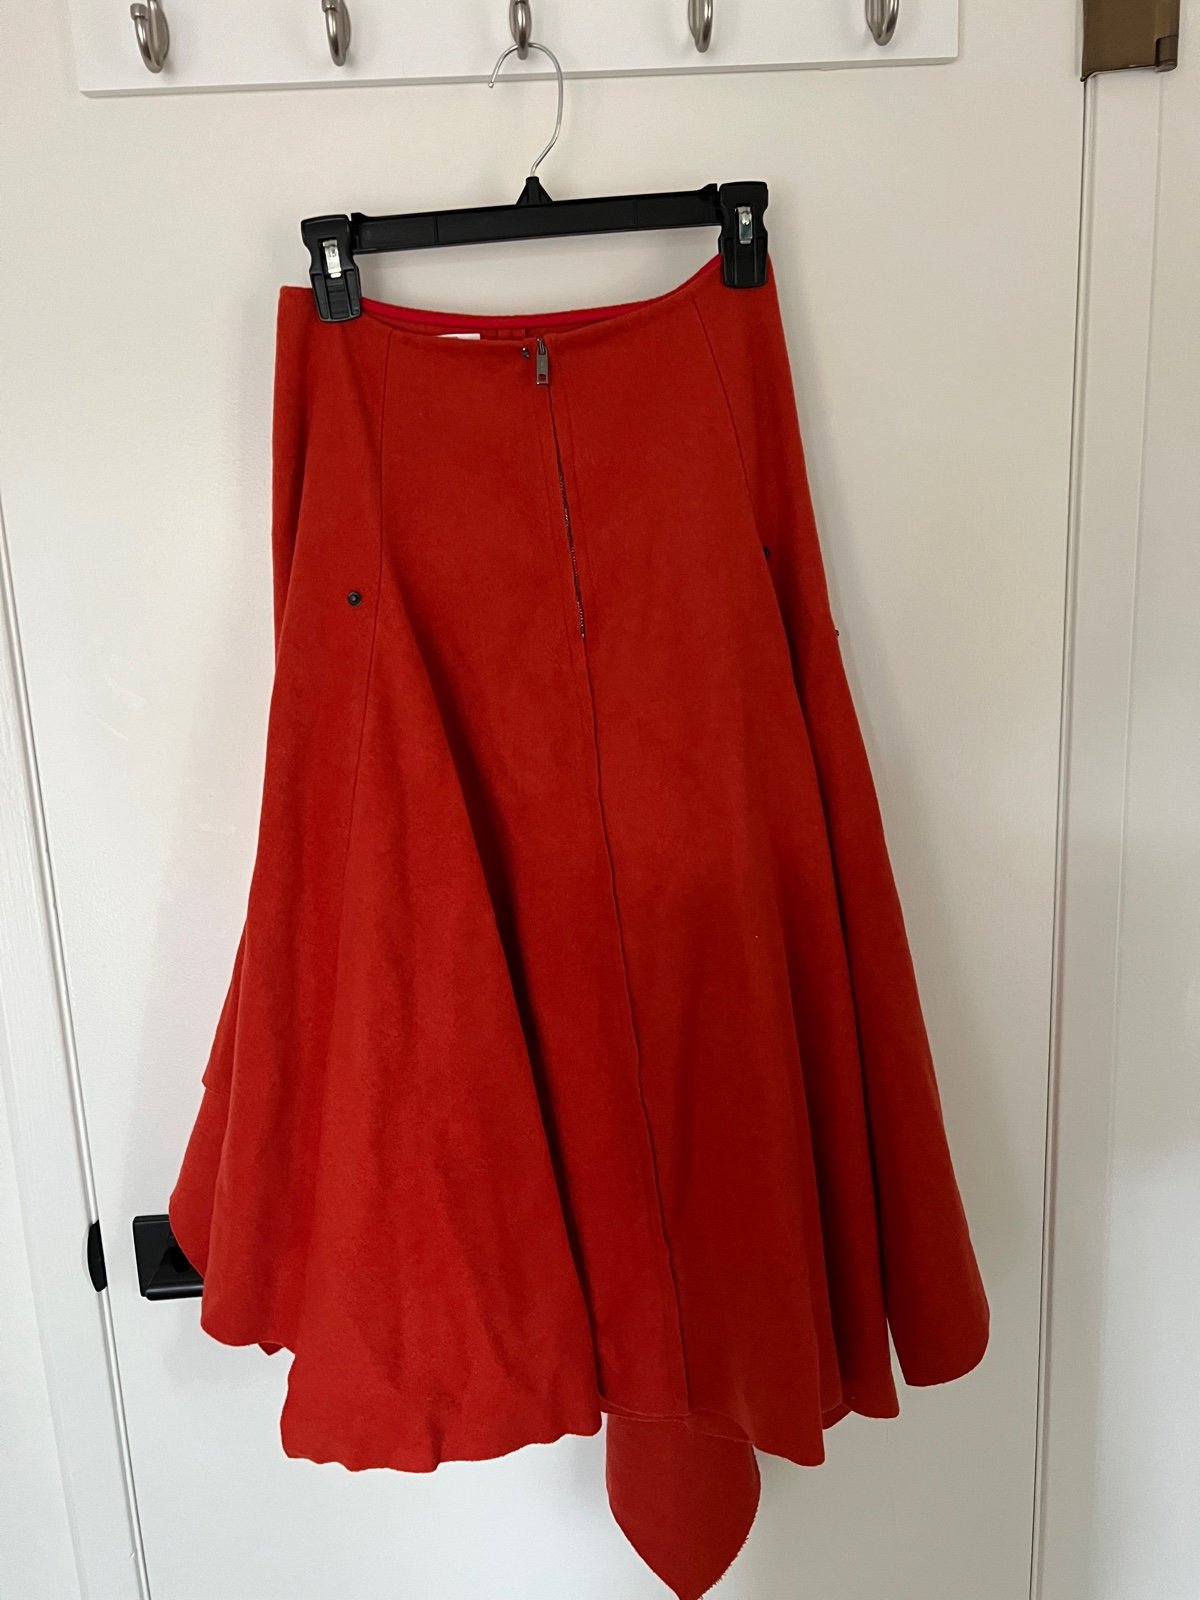 Special offer  Sportmax flared wool skirt lqqcE6xNs Everyday Low Prices